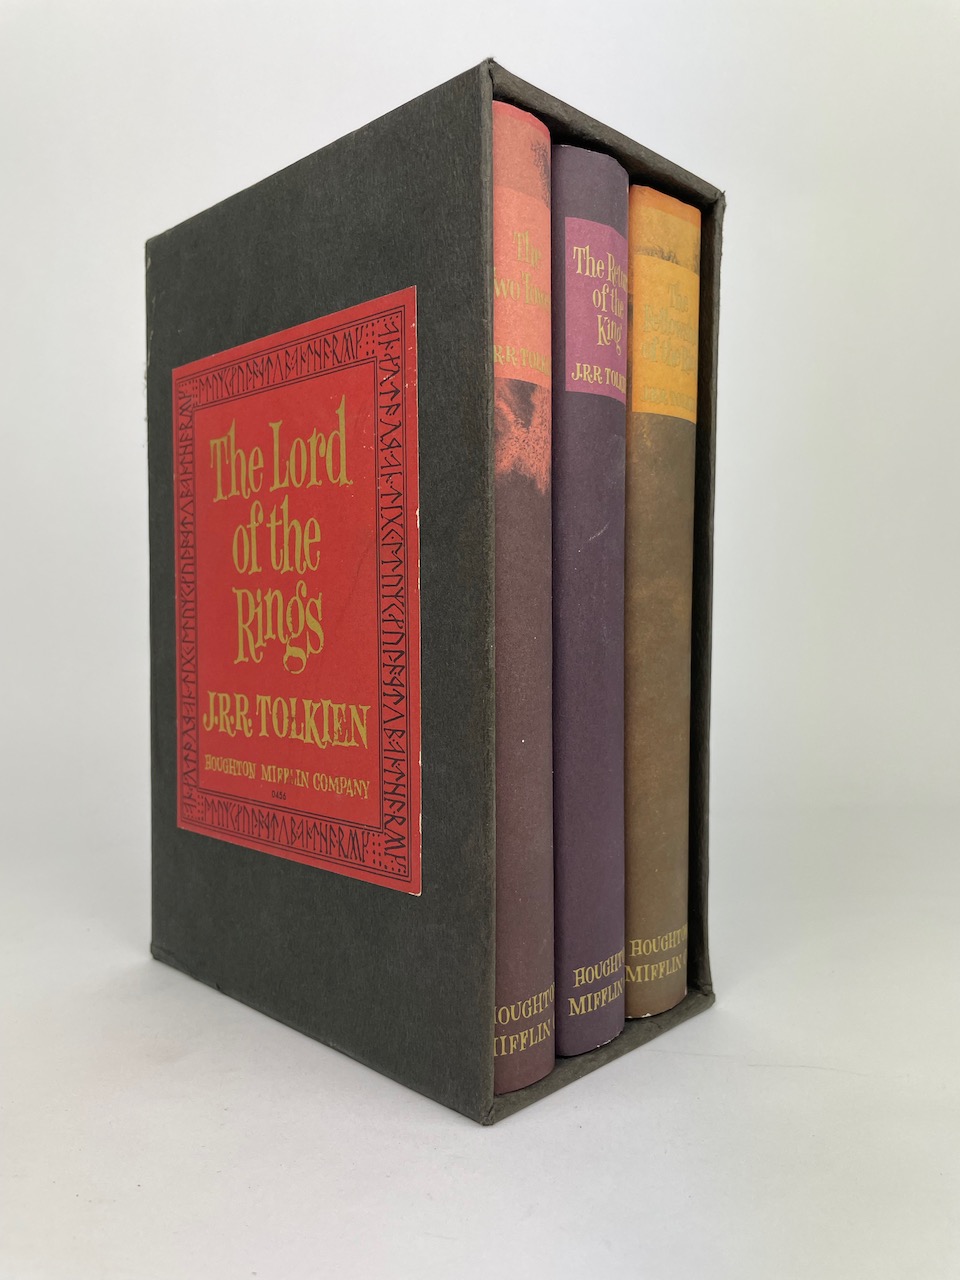 The Lord of the Rings, 2nd US Edition in Original Publishers Slipcase 9th/8th/8th 1